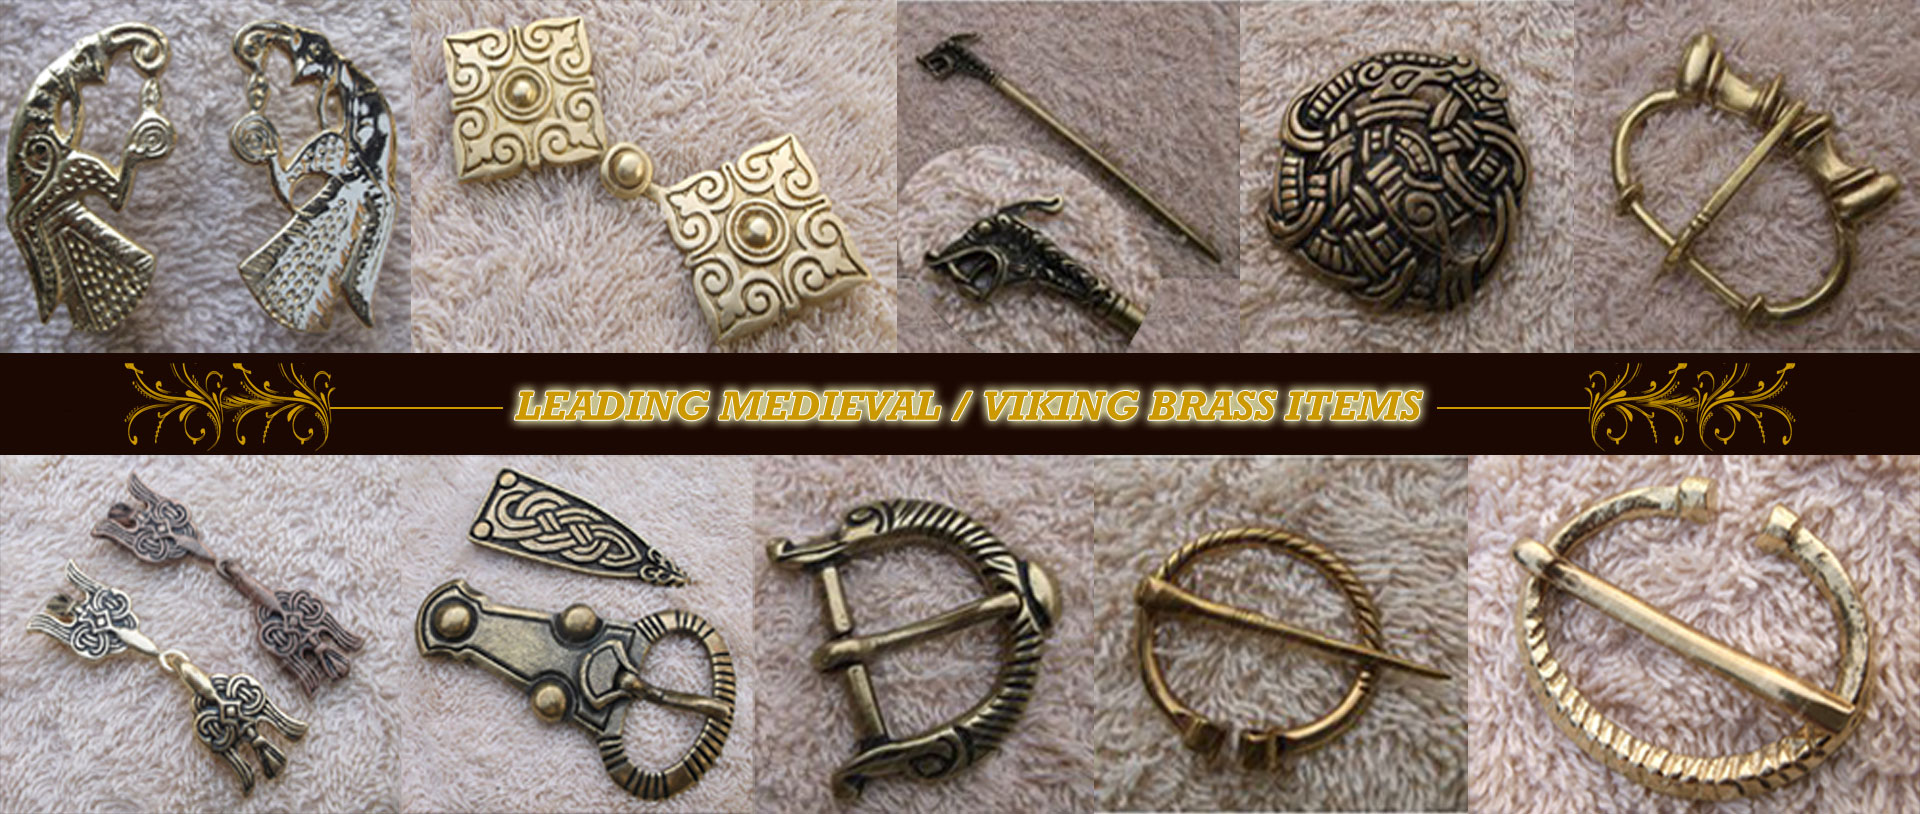 LEADING-MEDIEVAL-VIKING-BRASS-ITEMS